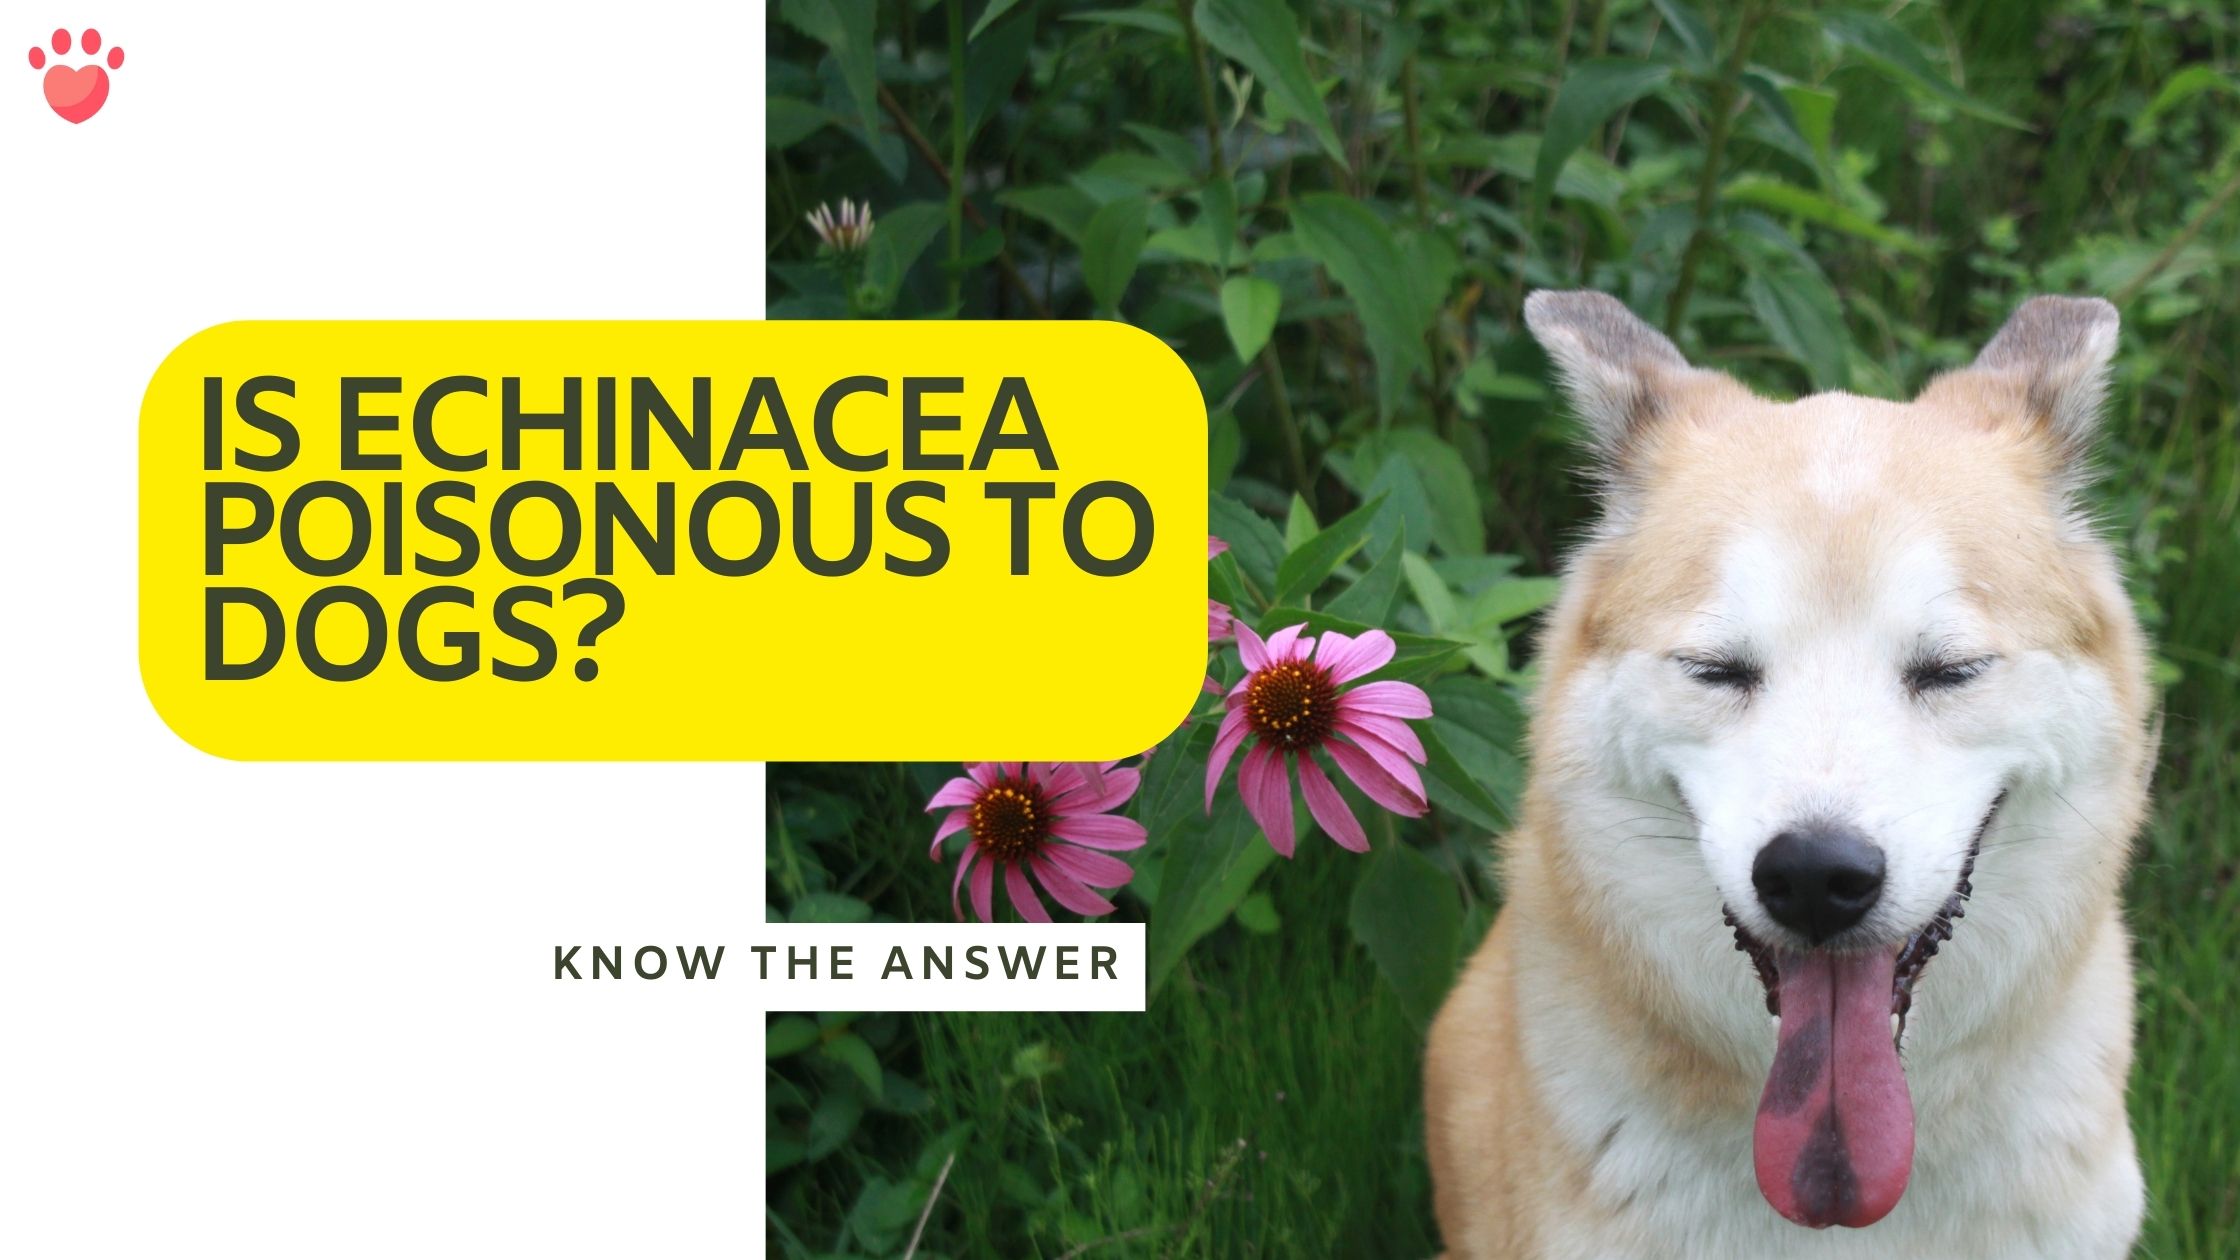 Is Echinacea poisonous to dogs